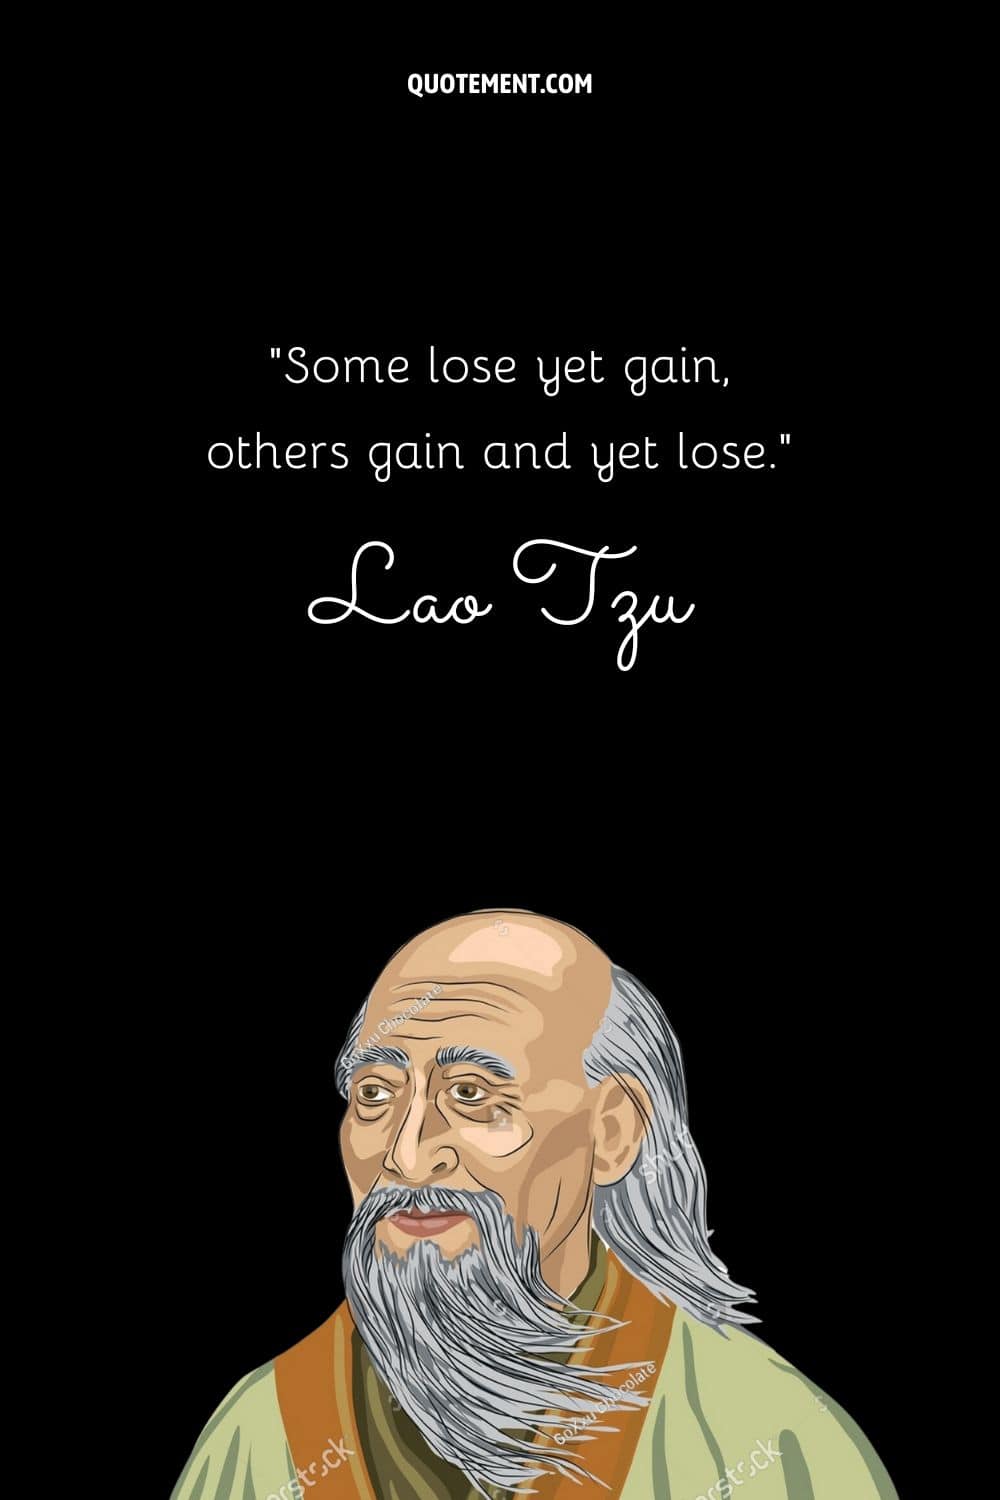 Some lose yet gain, others gain and yet lose